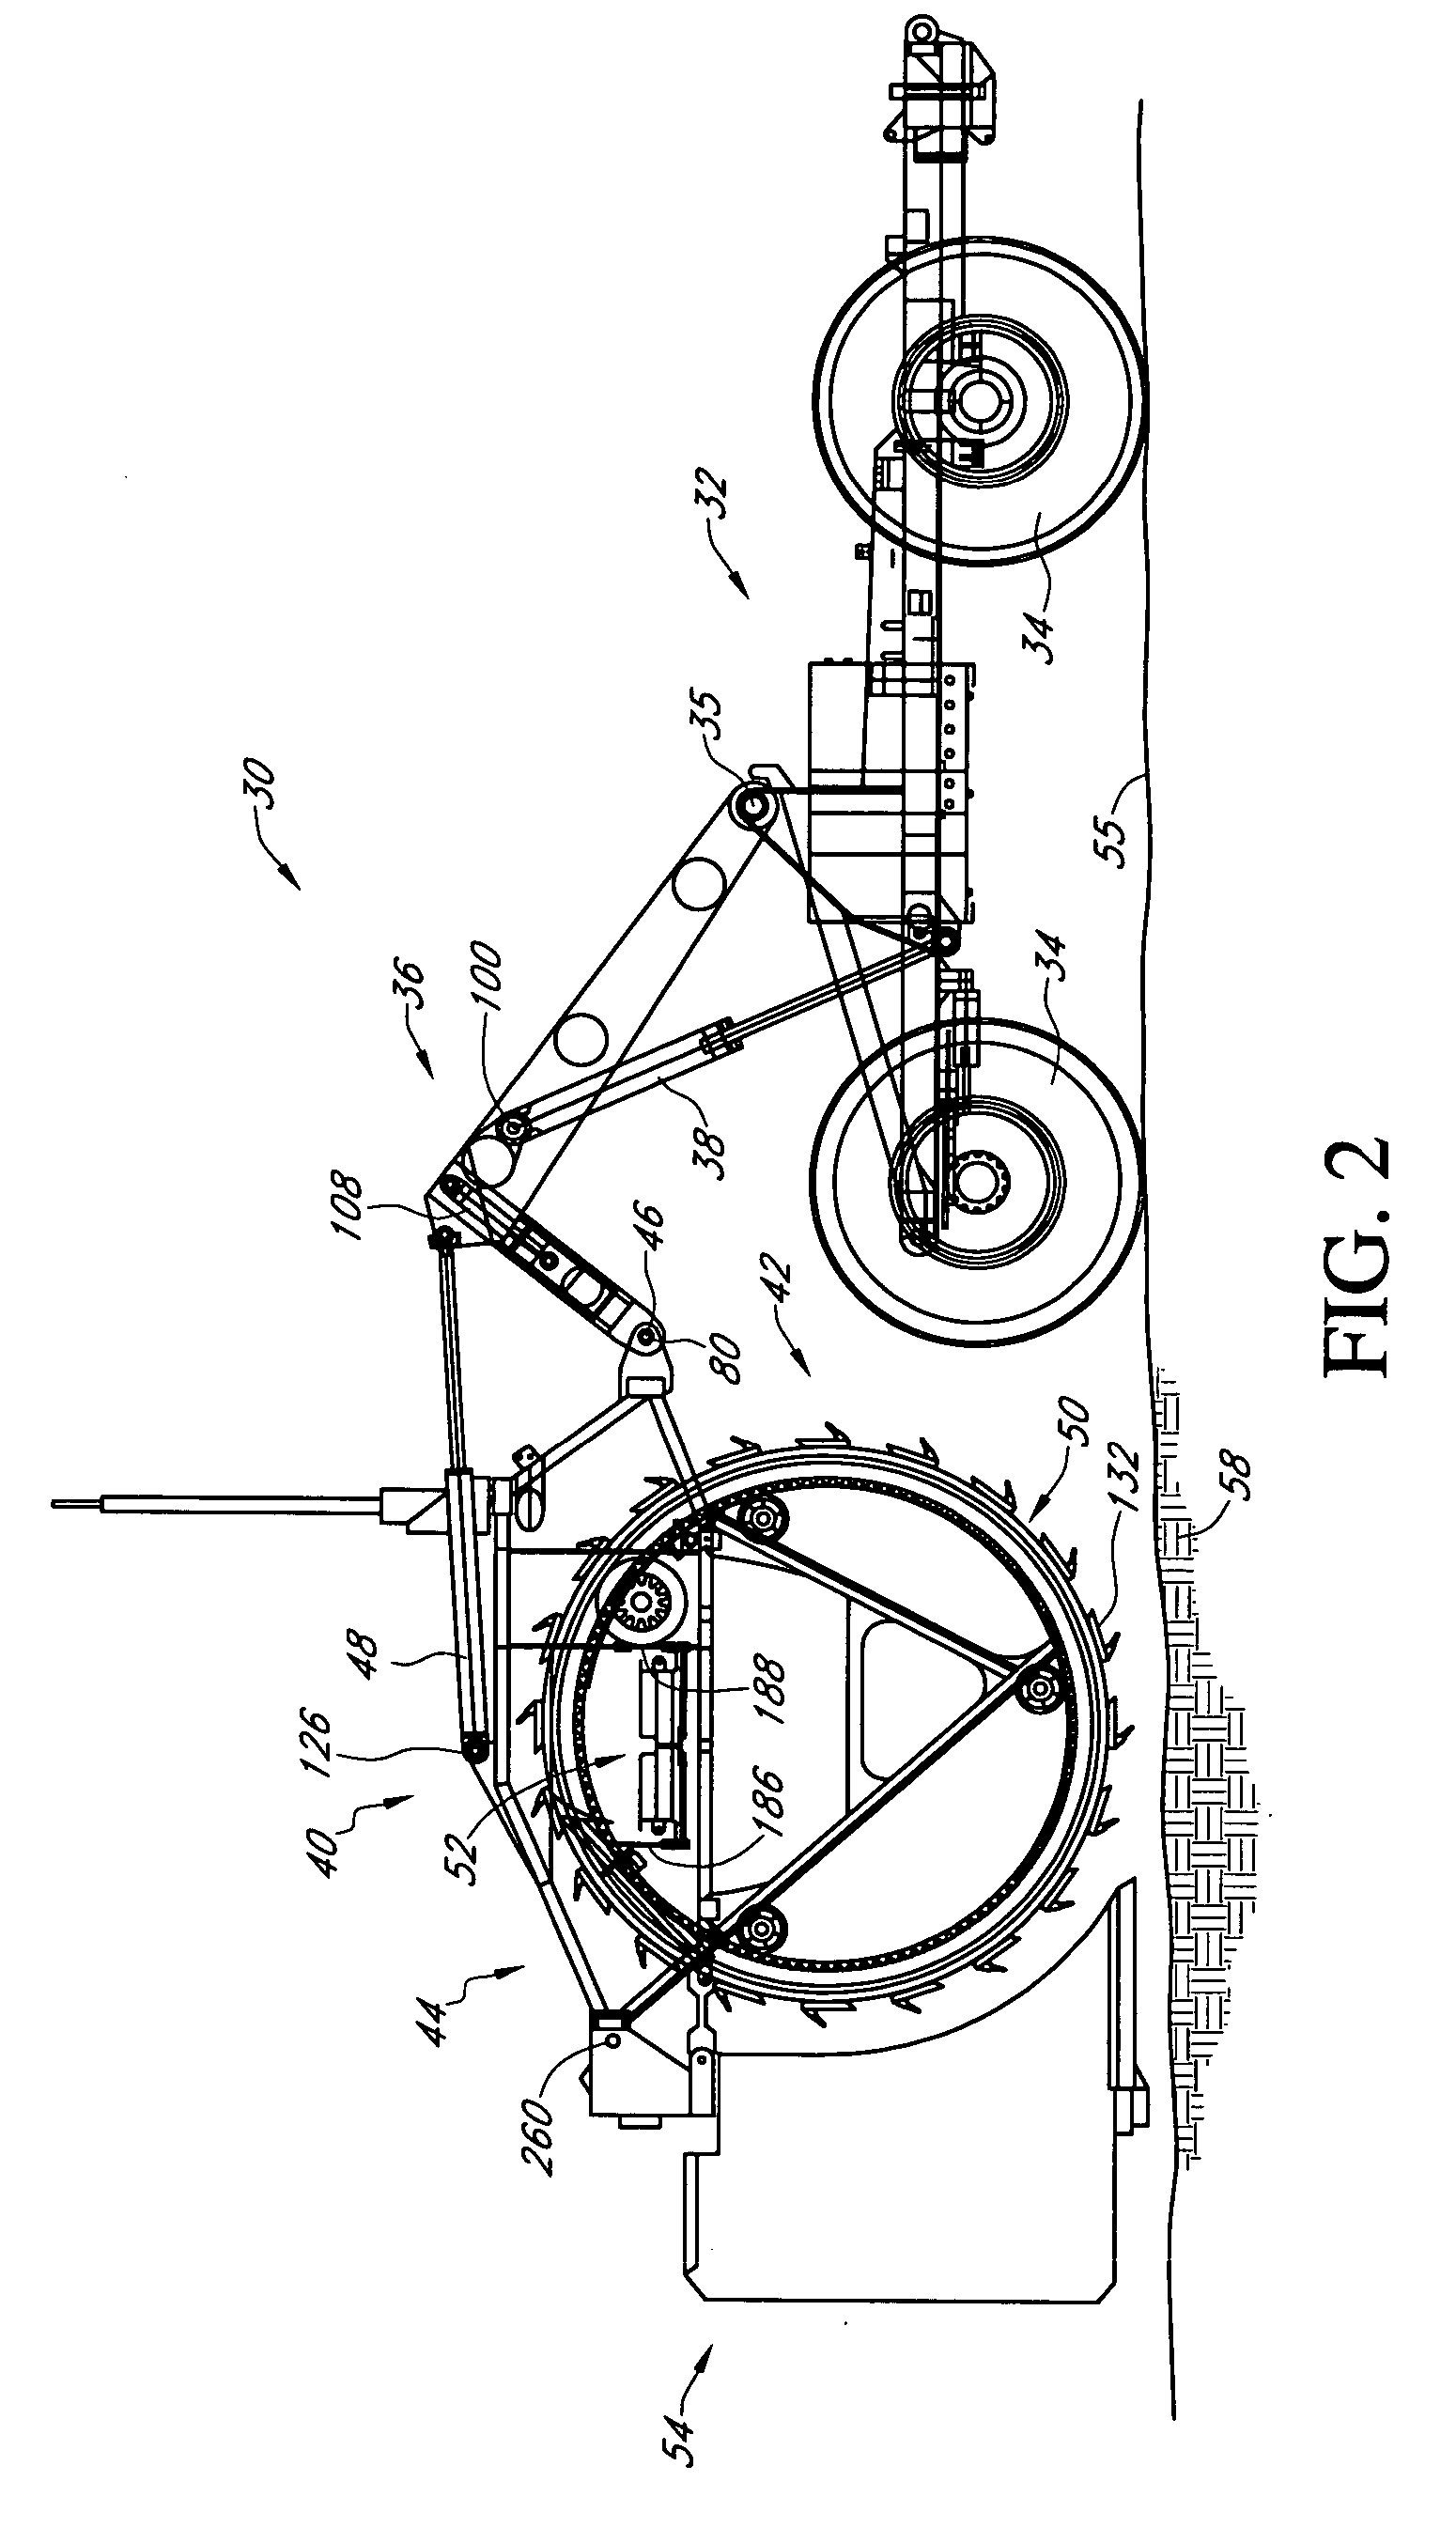 Excavating machine for rocky and other soils